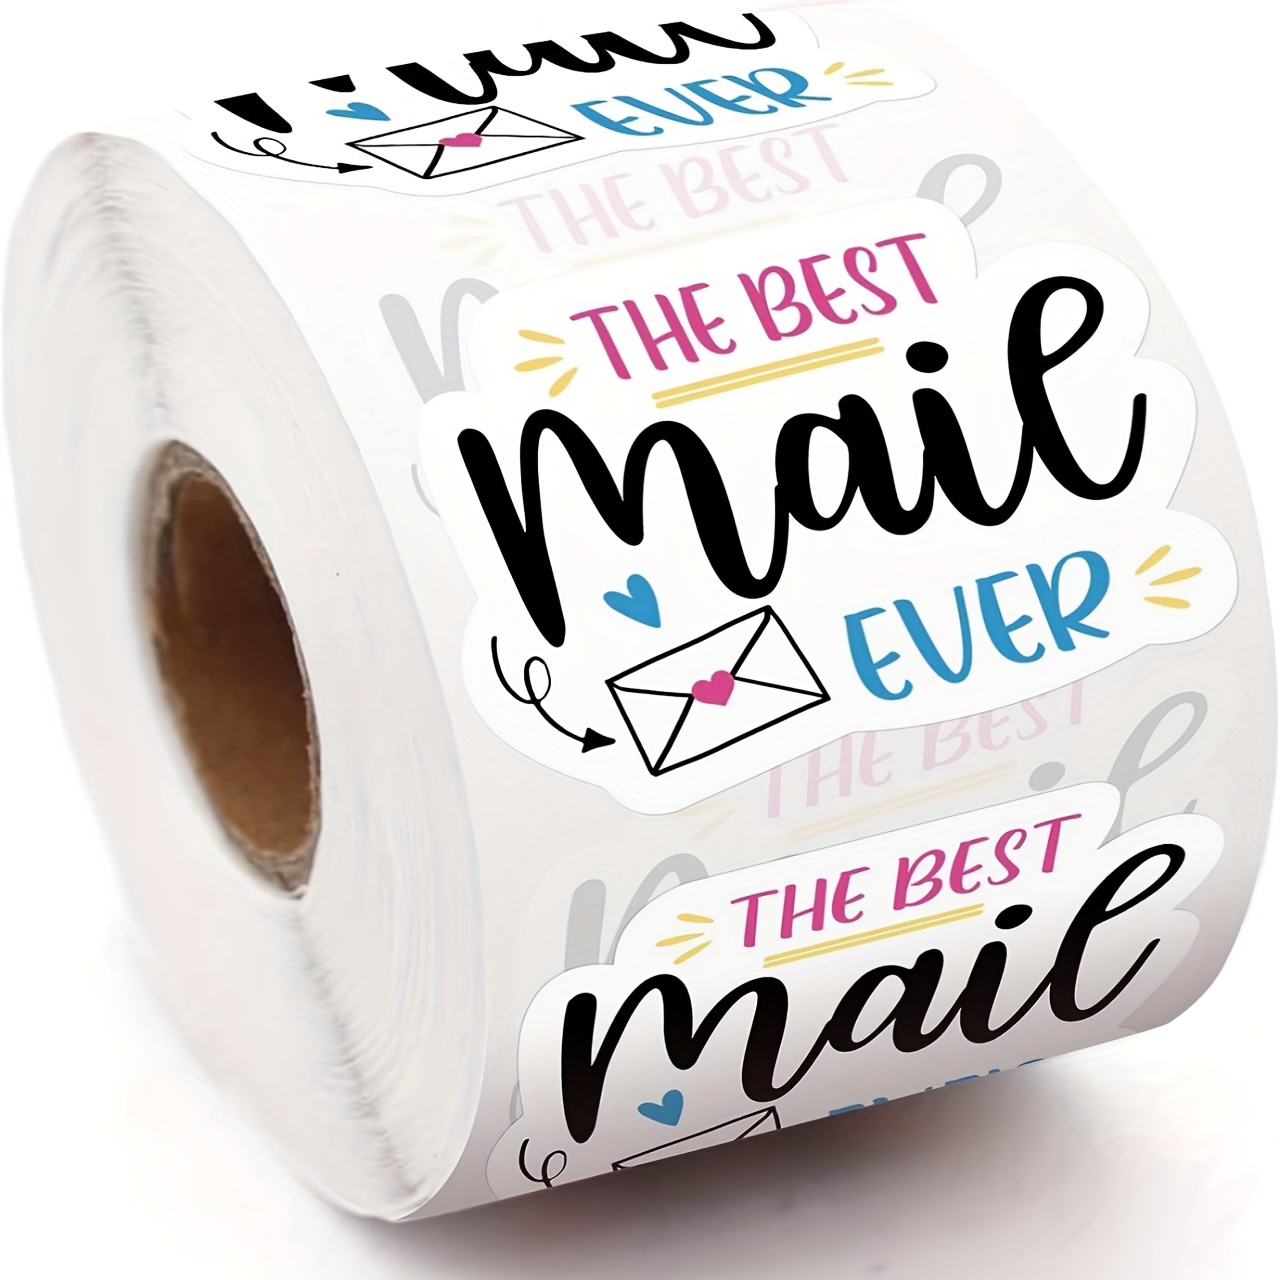 Dropship 500pcs/roll Happy Birthday Stickers Roll; 2.5cm Round Happy Birthday  Stickers Lables For Gift Wrapping to Sell Online at a Lower Price